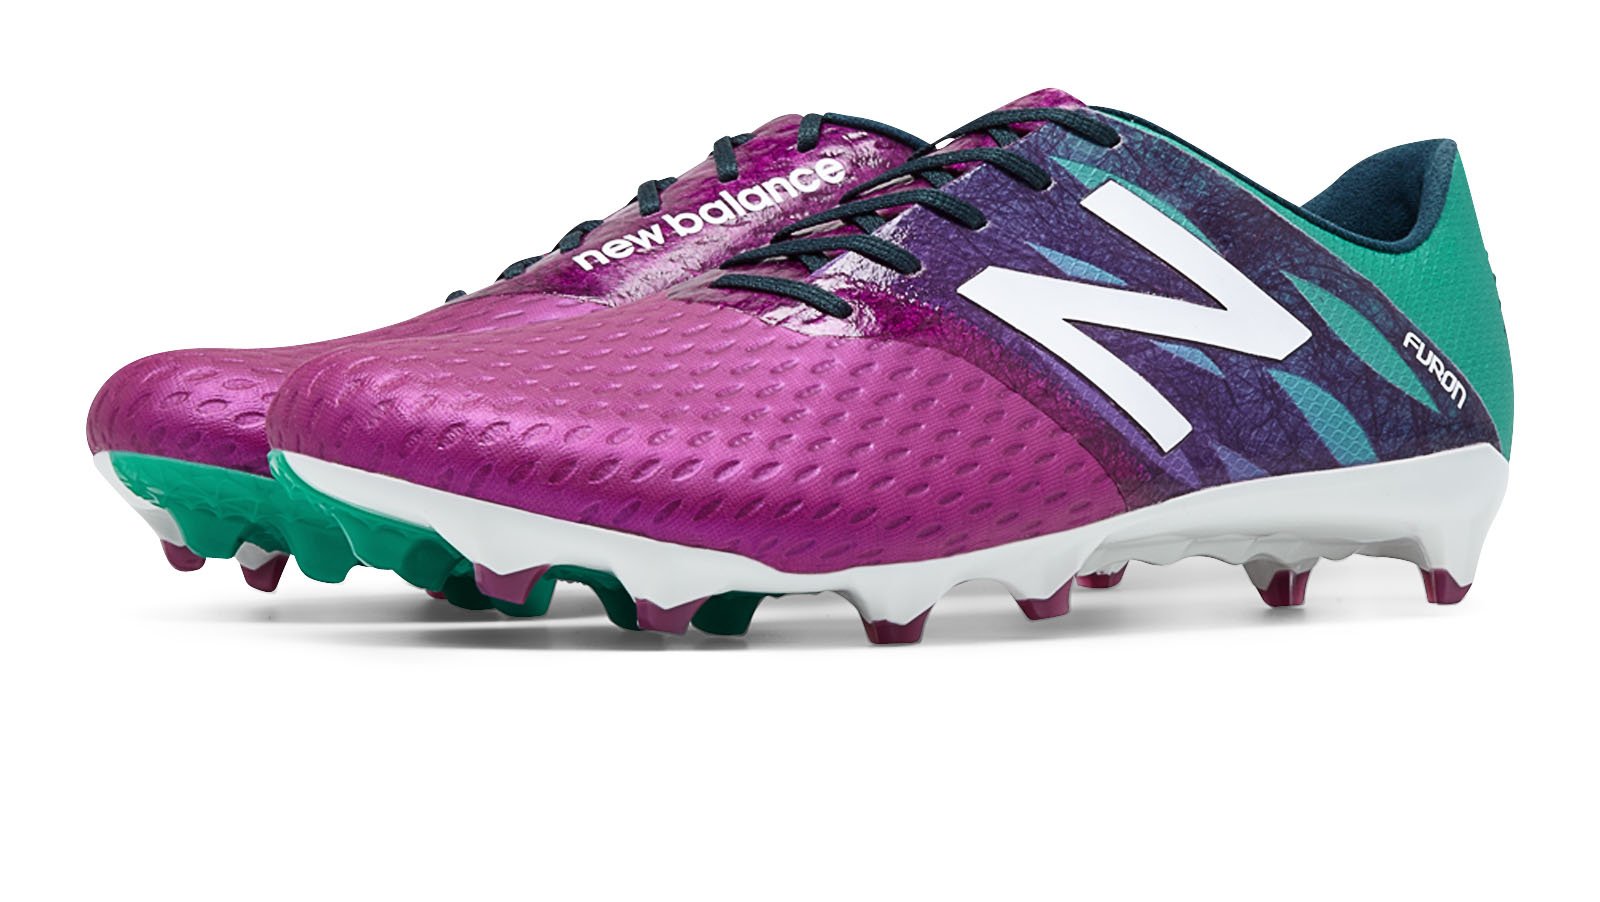 New Balance colour updates for Visaro and Fuson boots